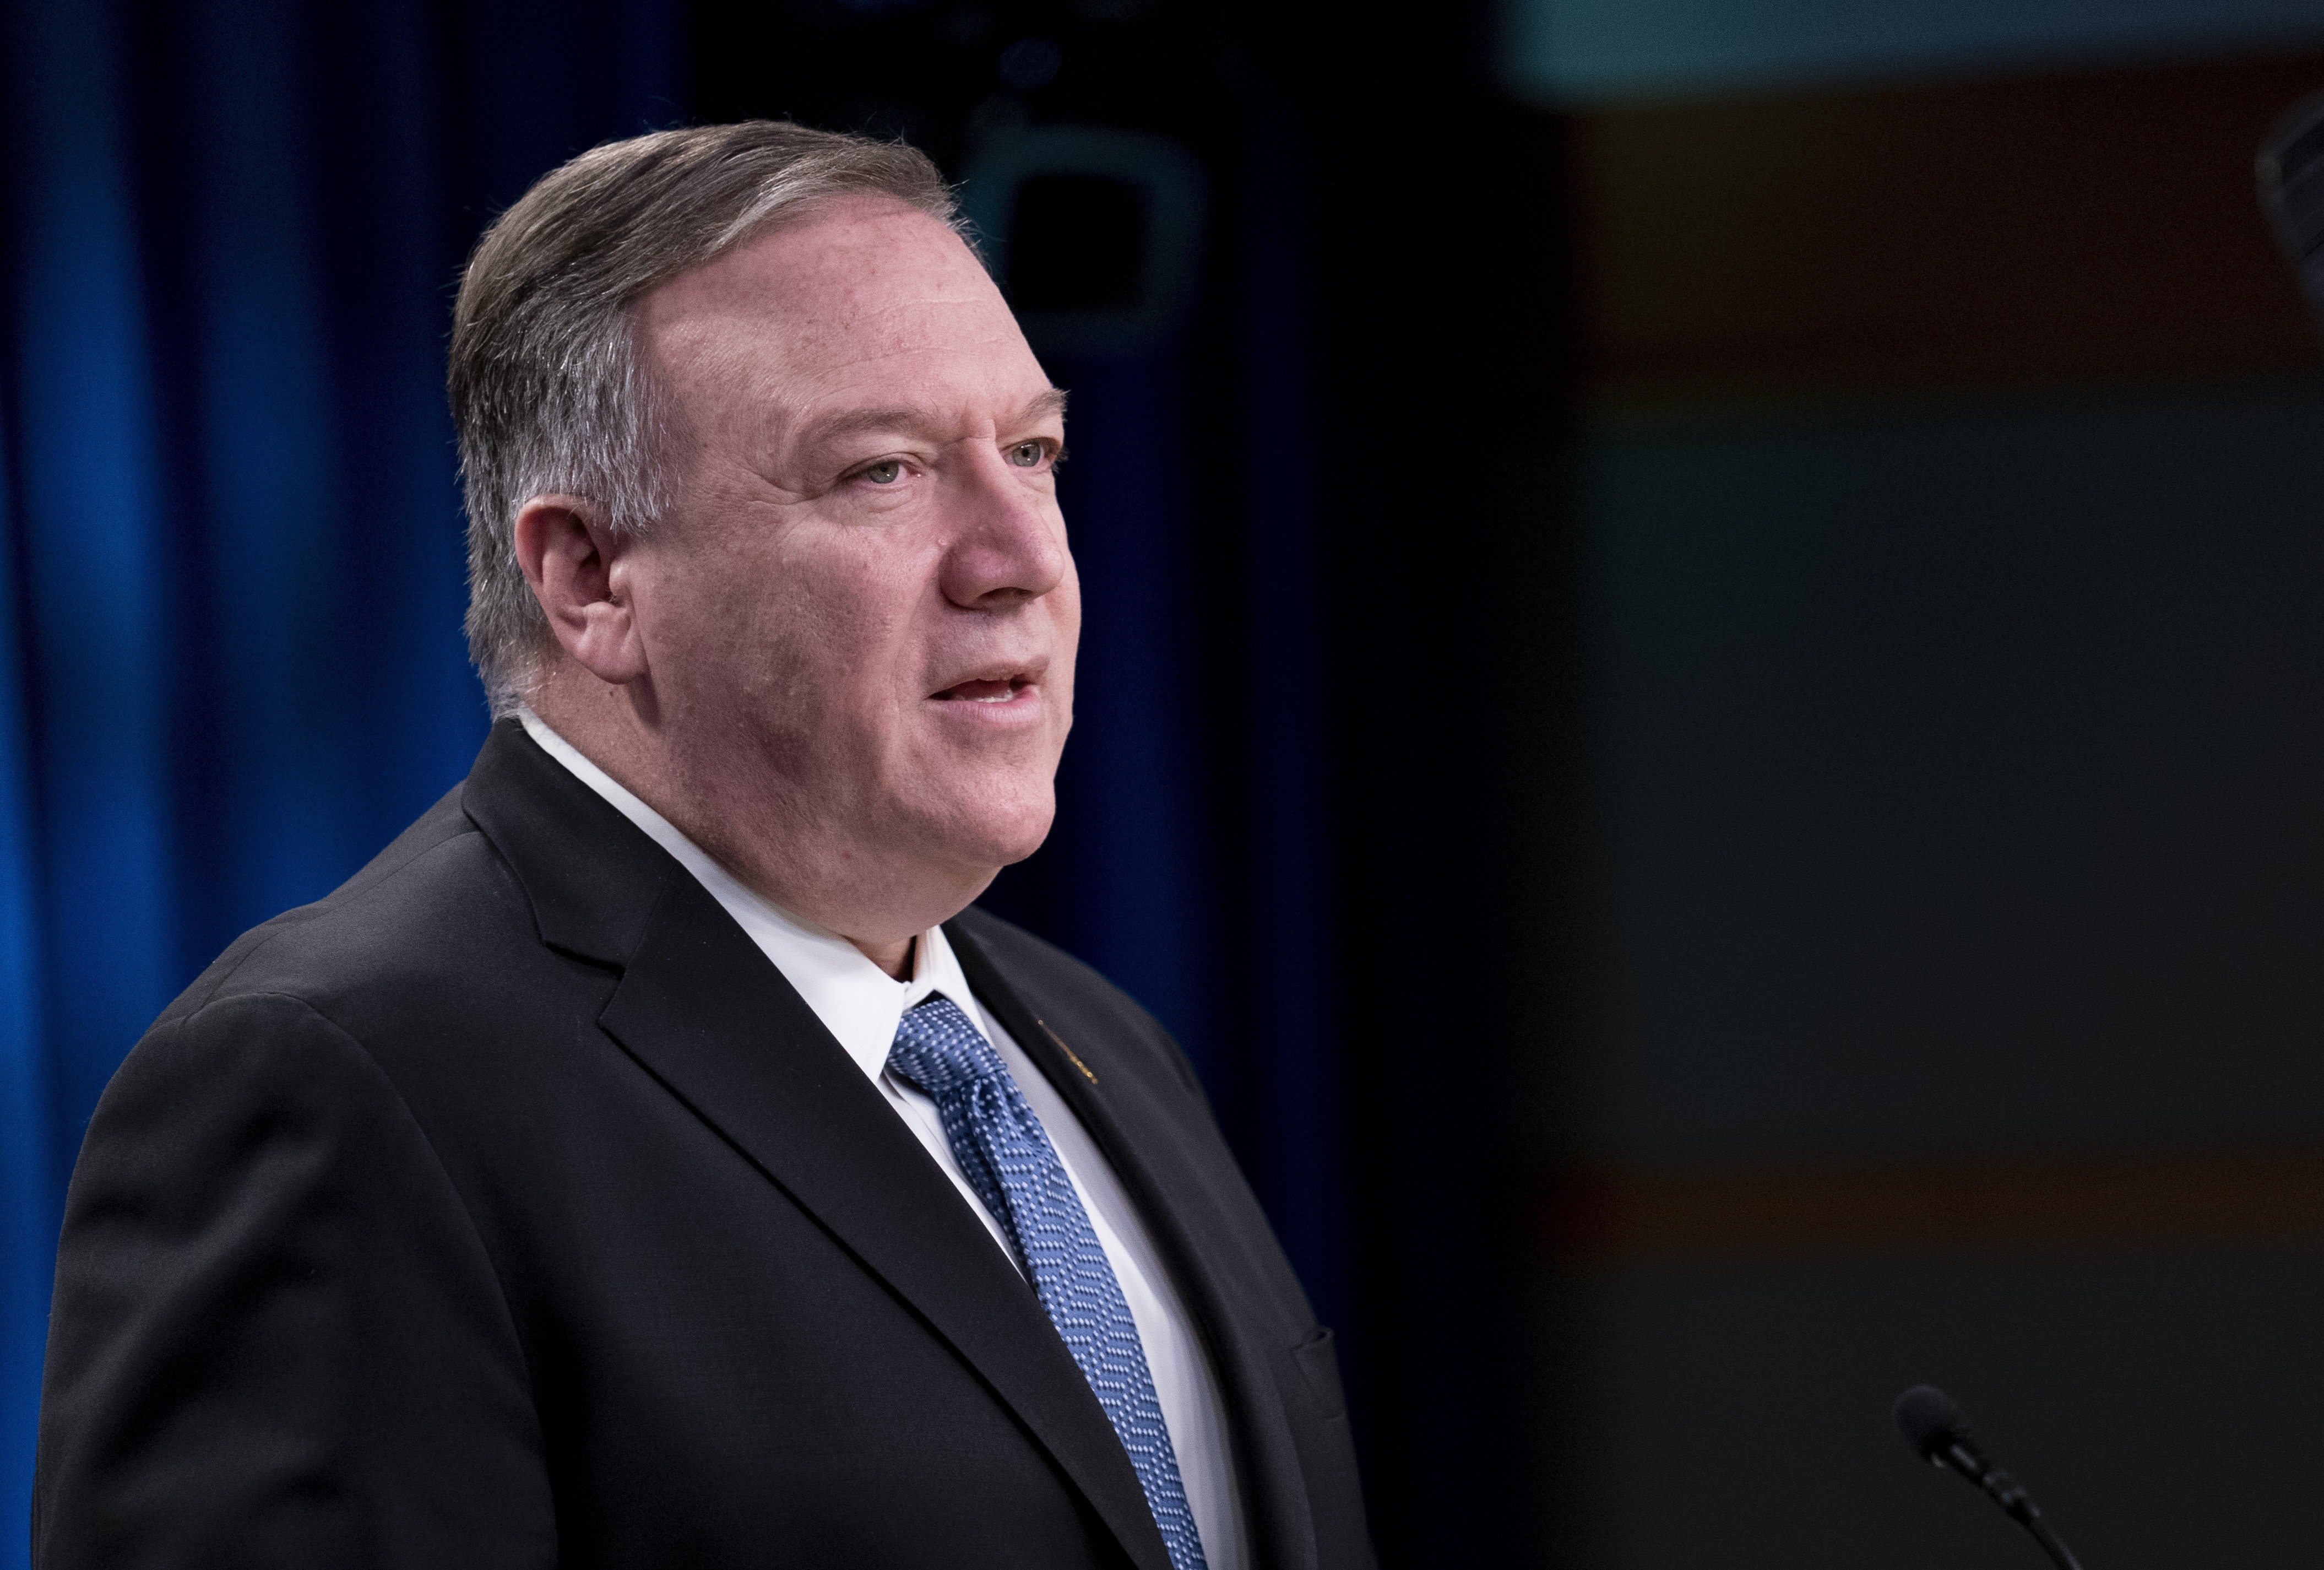 US Secretary of State Mike Pompeo has been speaking of the “Wuhan virus” despite Beijing’s protests. Photo: Xinhua